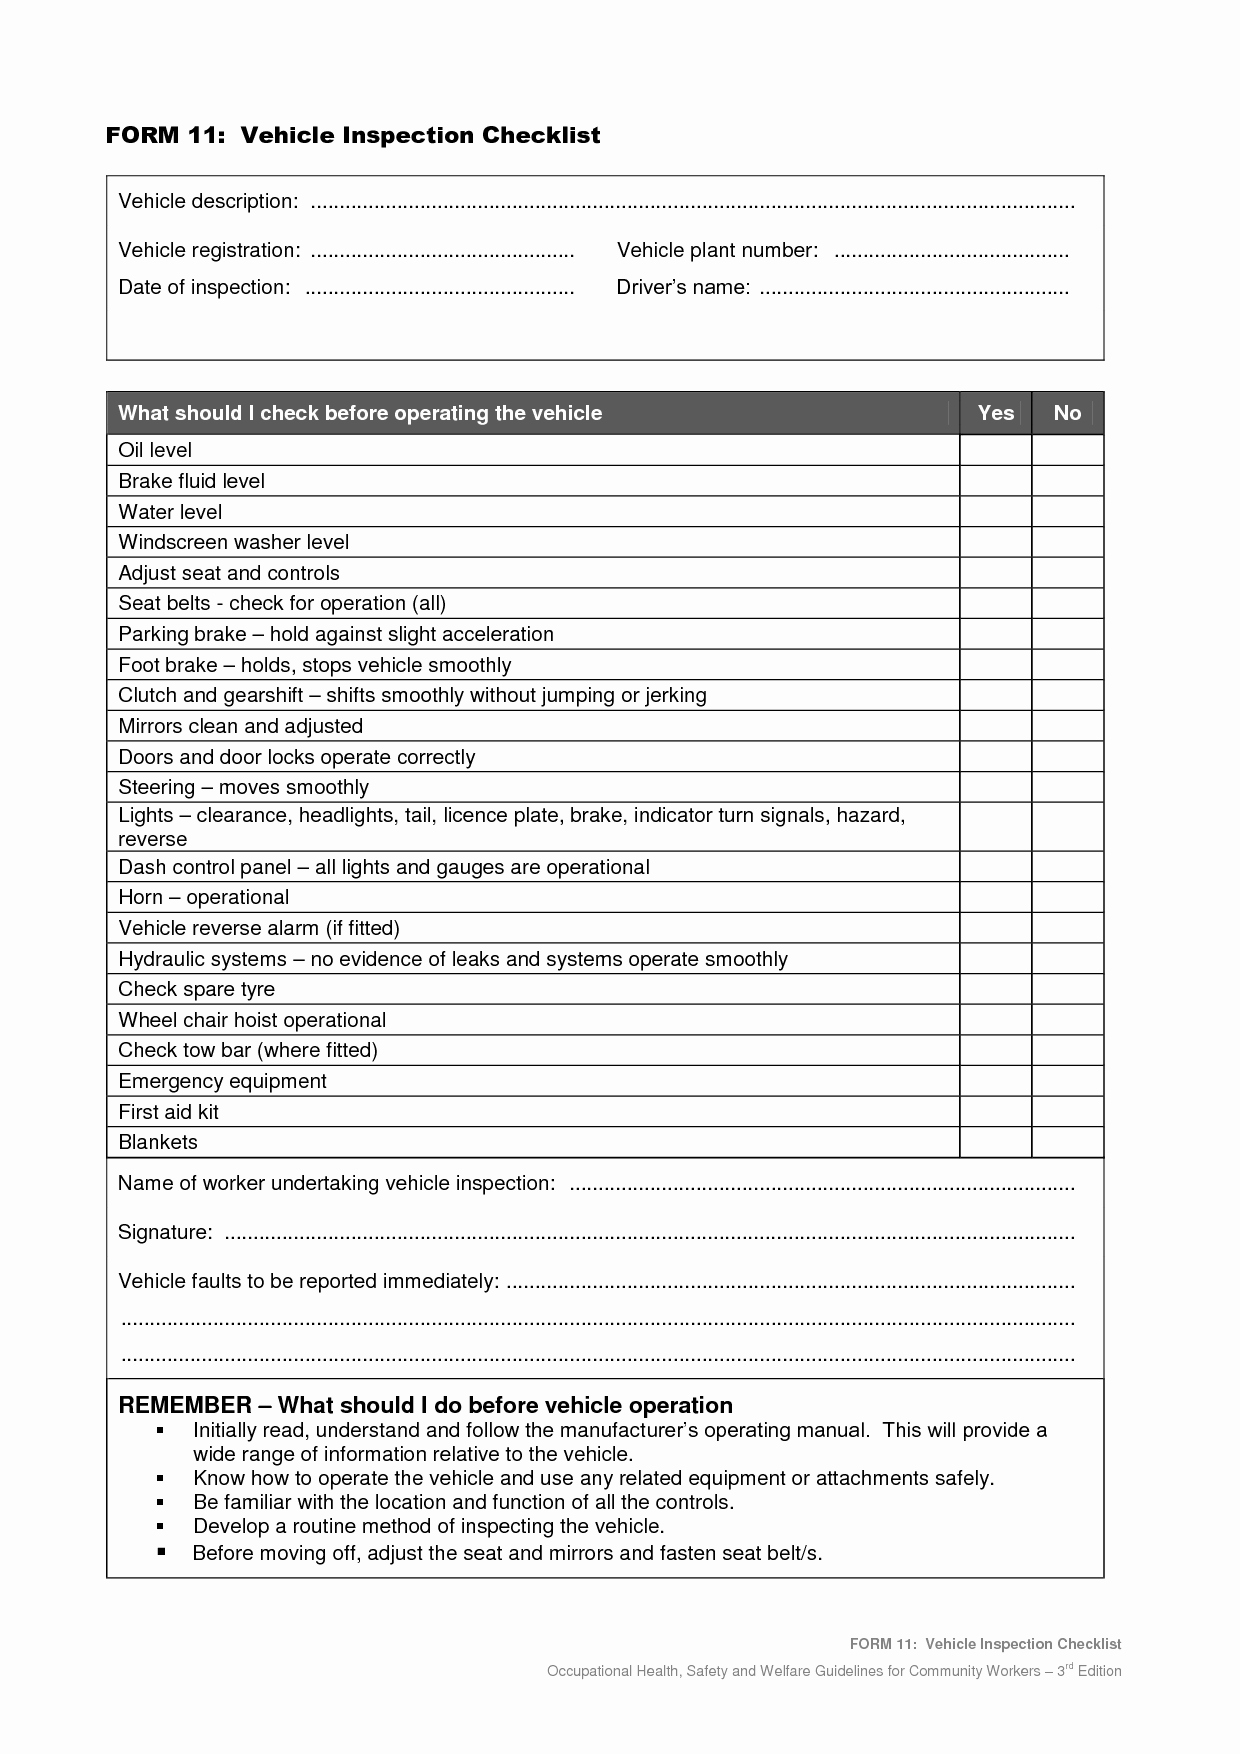 Daily Vehicle Inspection Checklist Template Beautiful Vehicle Safety Inspection Checklist form